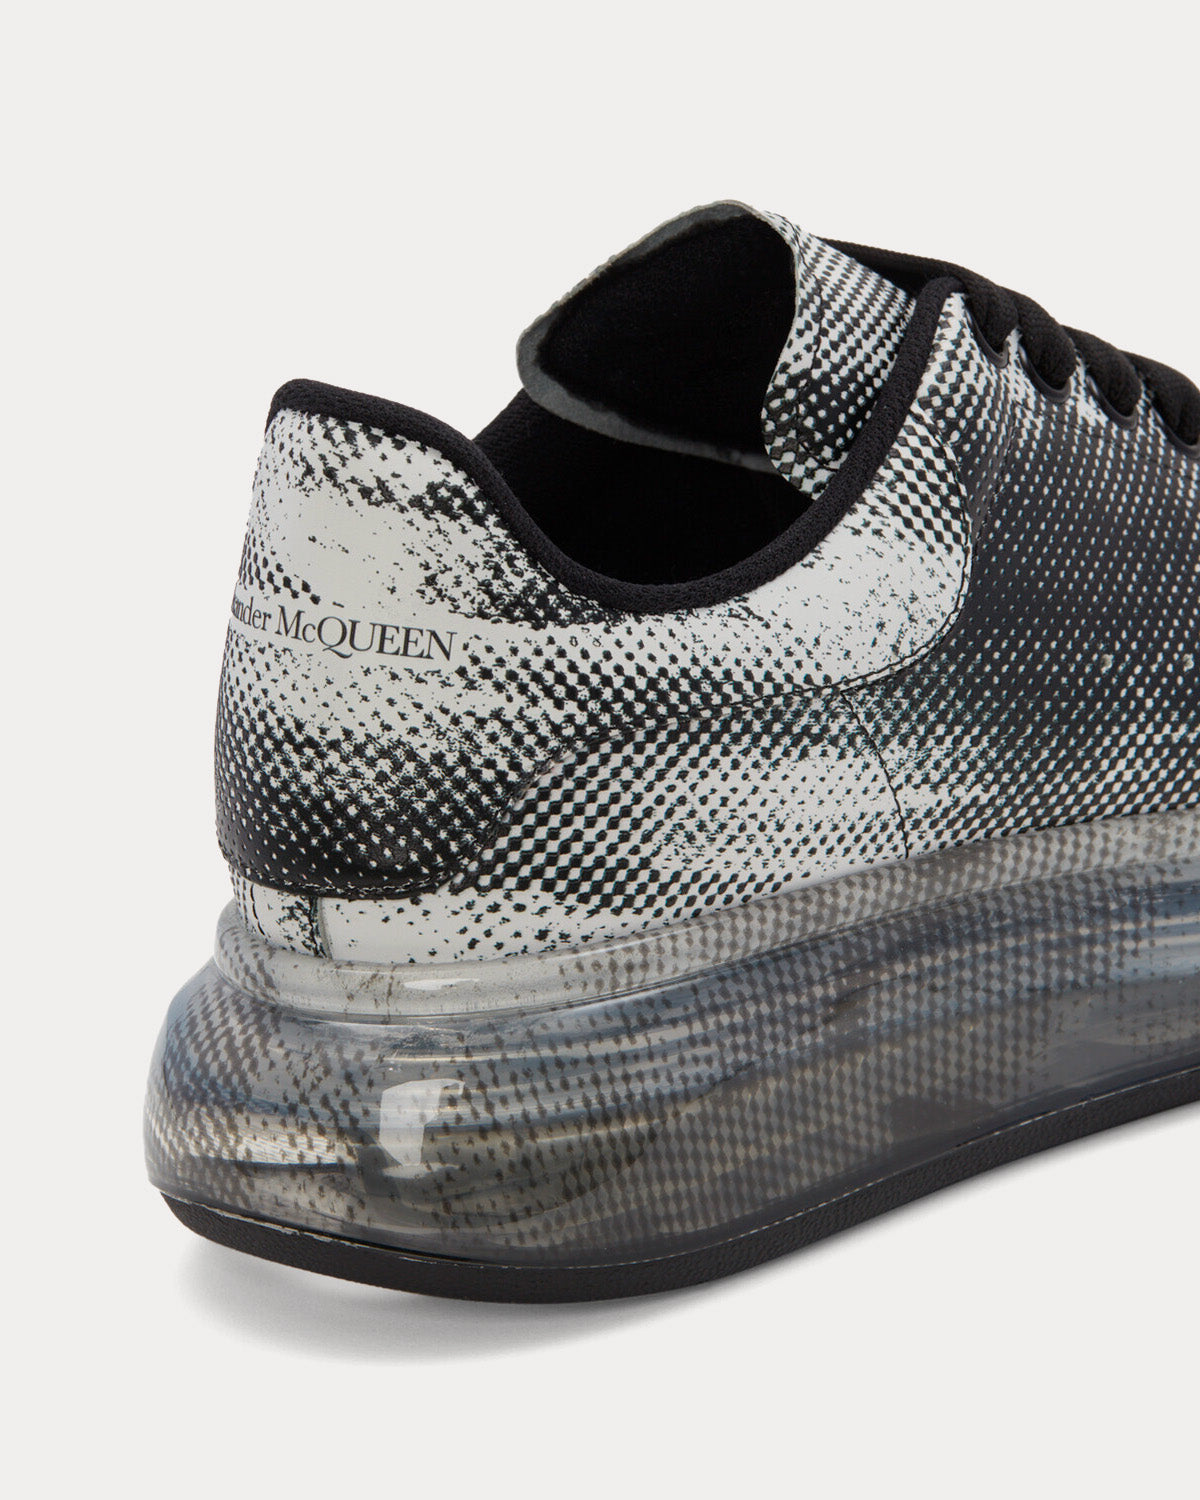 Alexander McQueen - Oversized All-Over Exploded Pixelated Print Black / White Low Top Sneakers